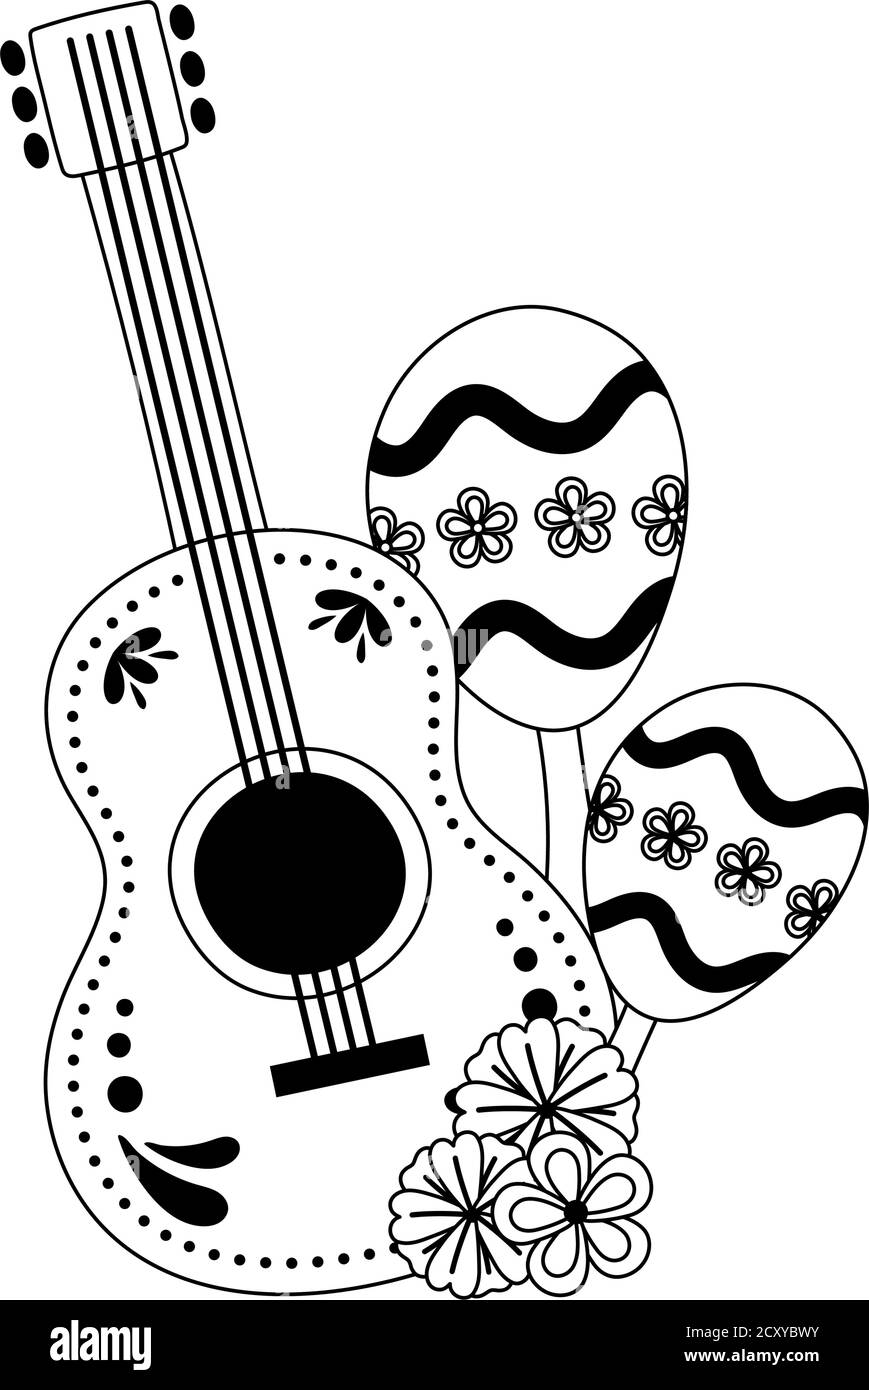 Day of the dead guitar maracas and flowers mexican celebration vector illustration line style stock vector image art